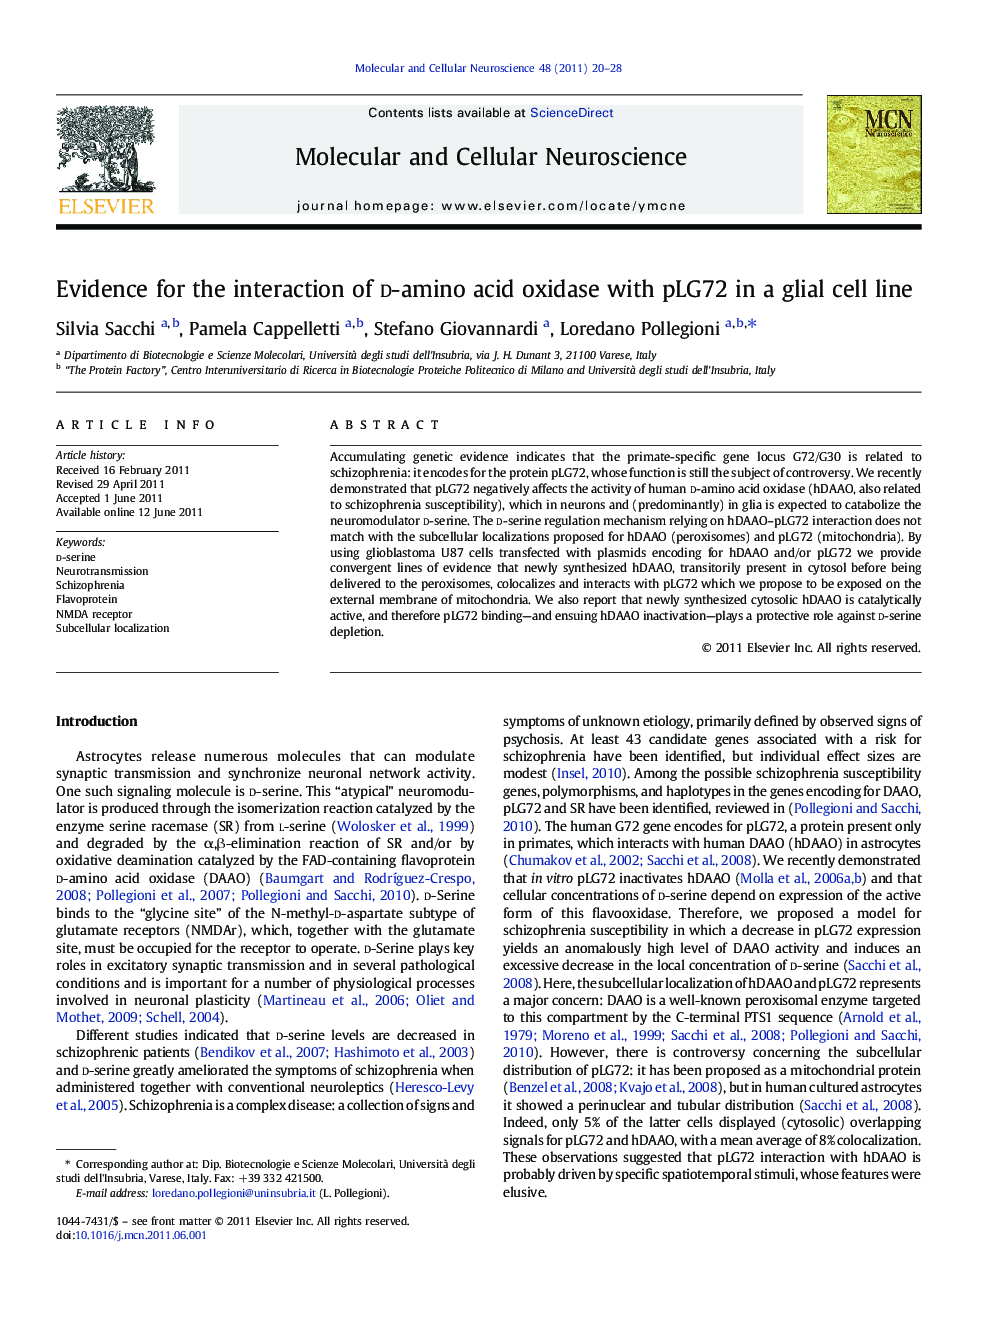 Evidence for the interaction of d-amino acid oxidase with pLG72 in a glial cell line